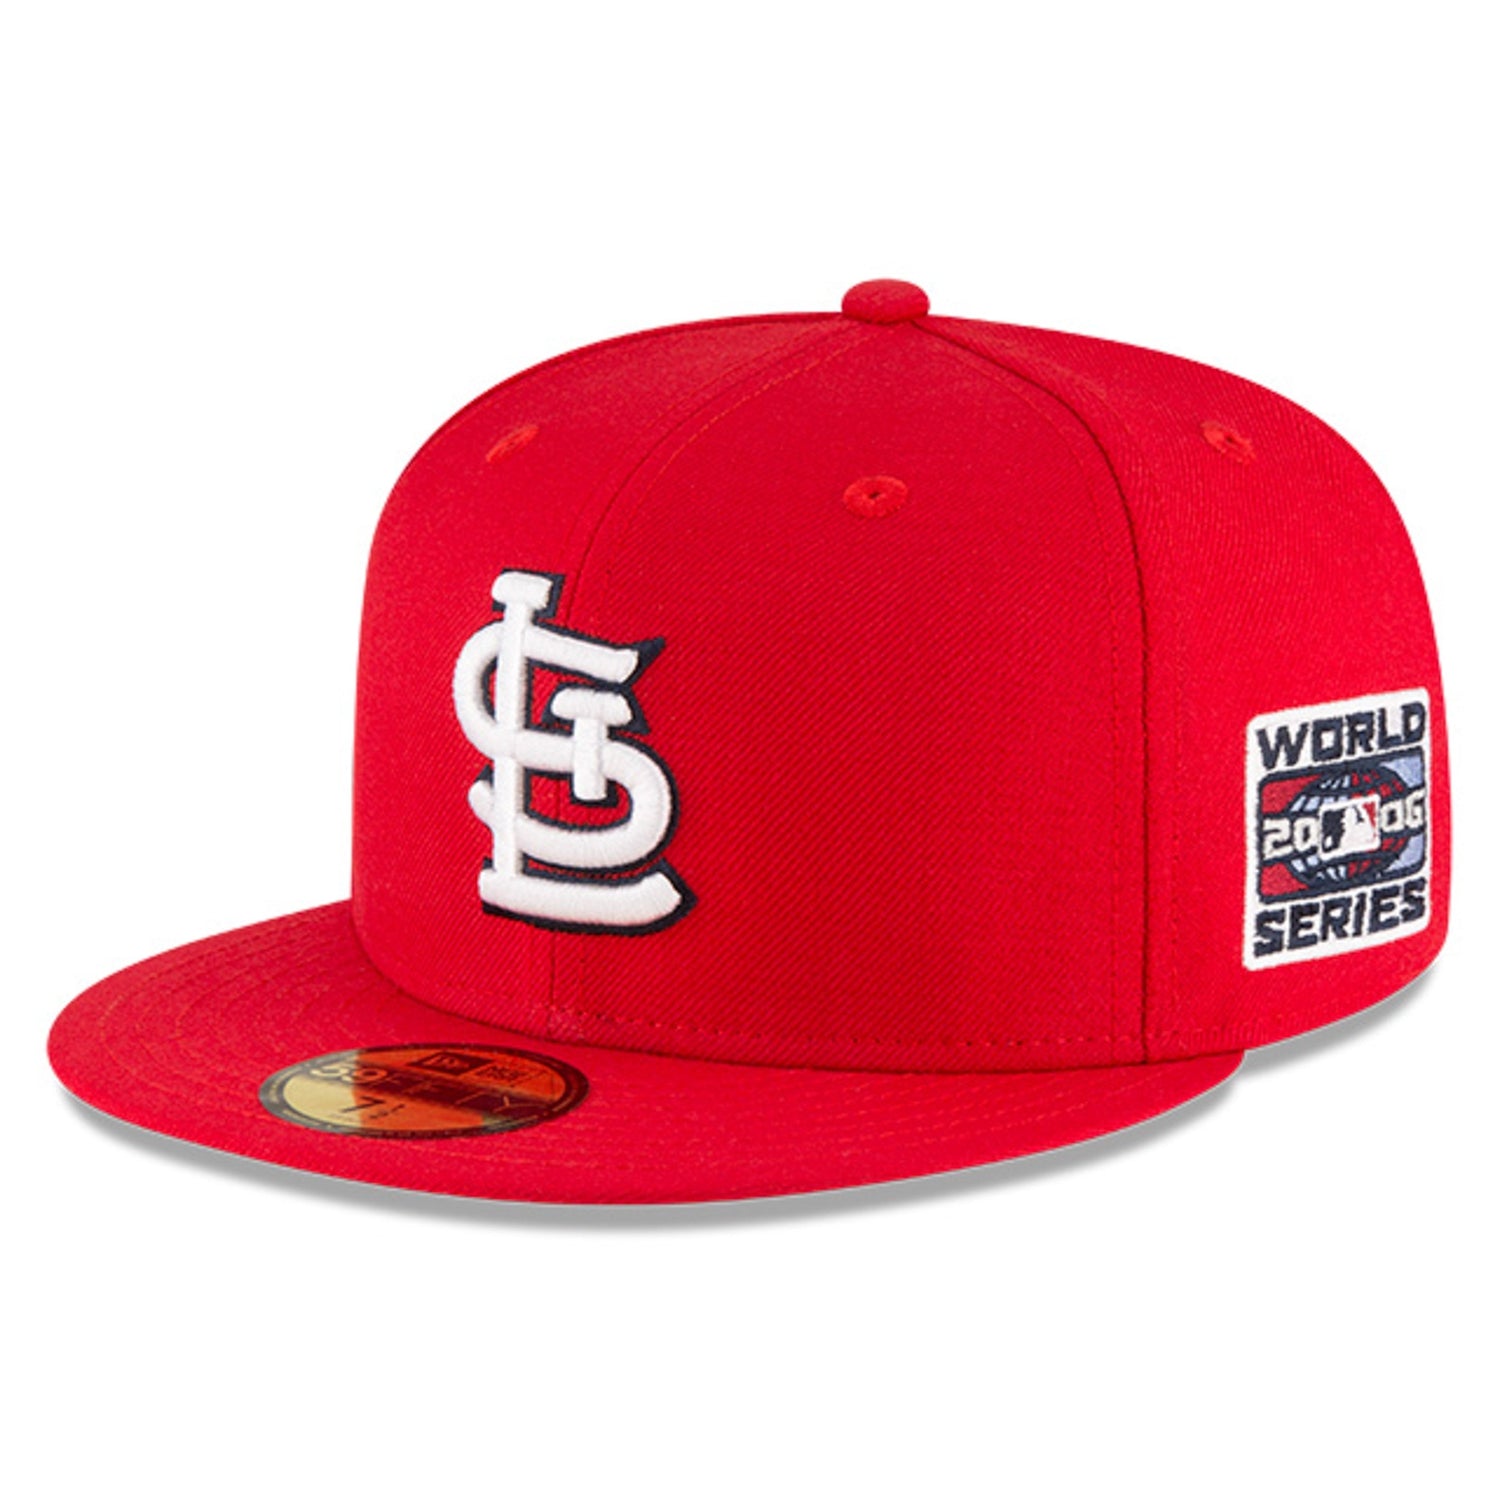 Exclusive St. Louis Cardinals Hat Club New Era 5950 Fitted Hat - Size 7 7/8